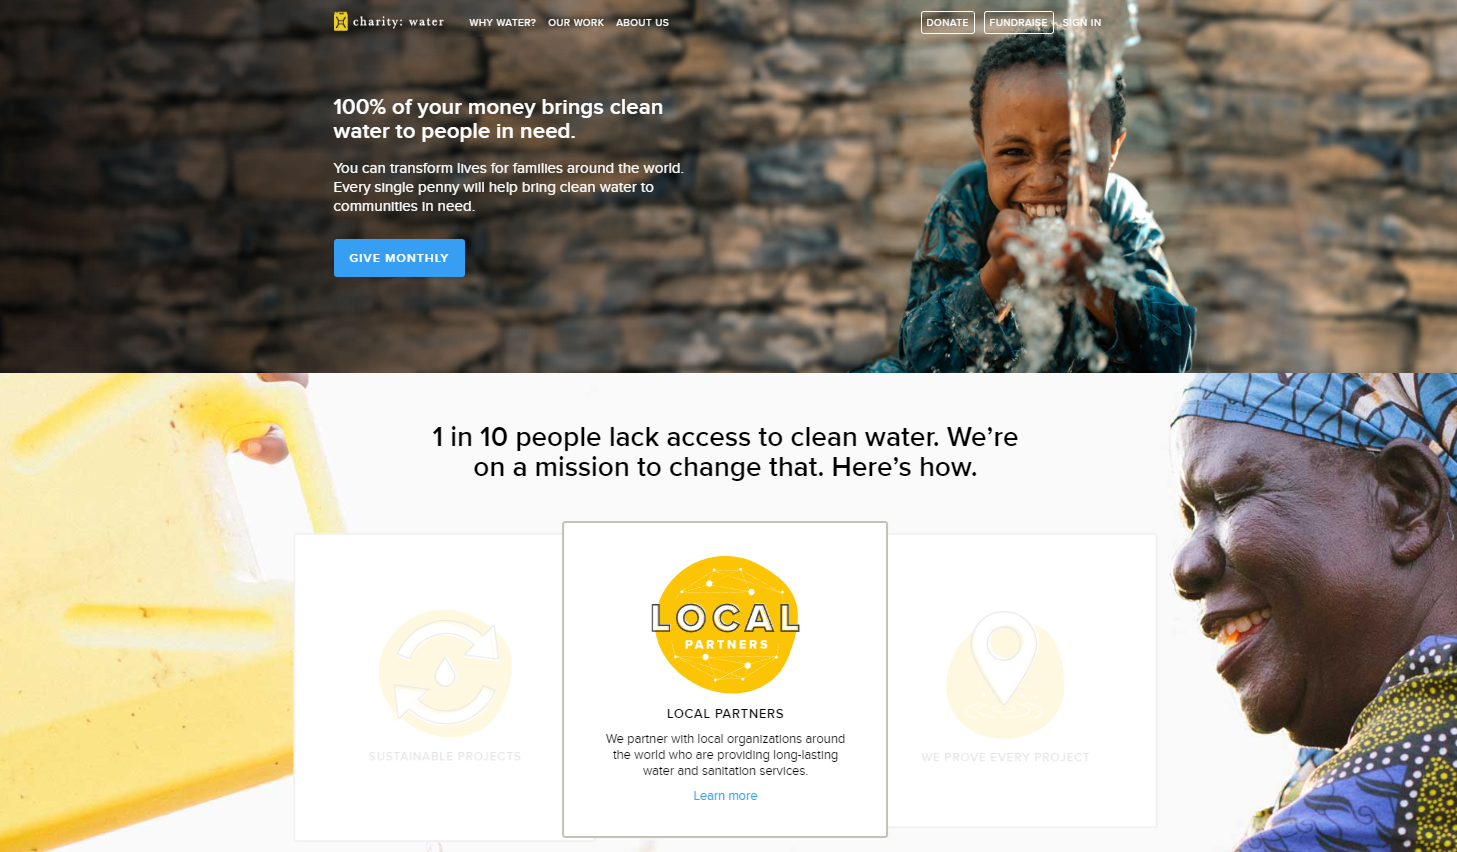 charity-water-home-page-design